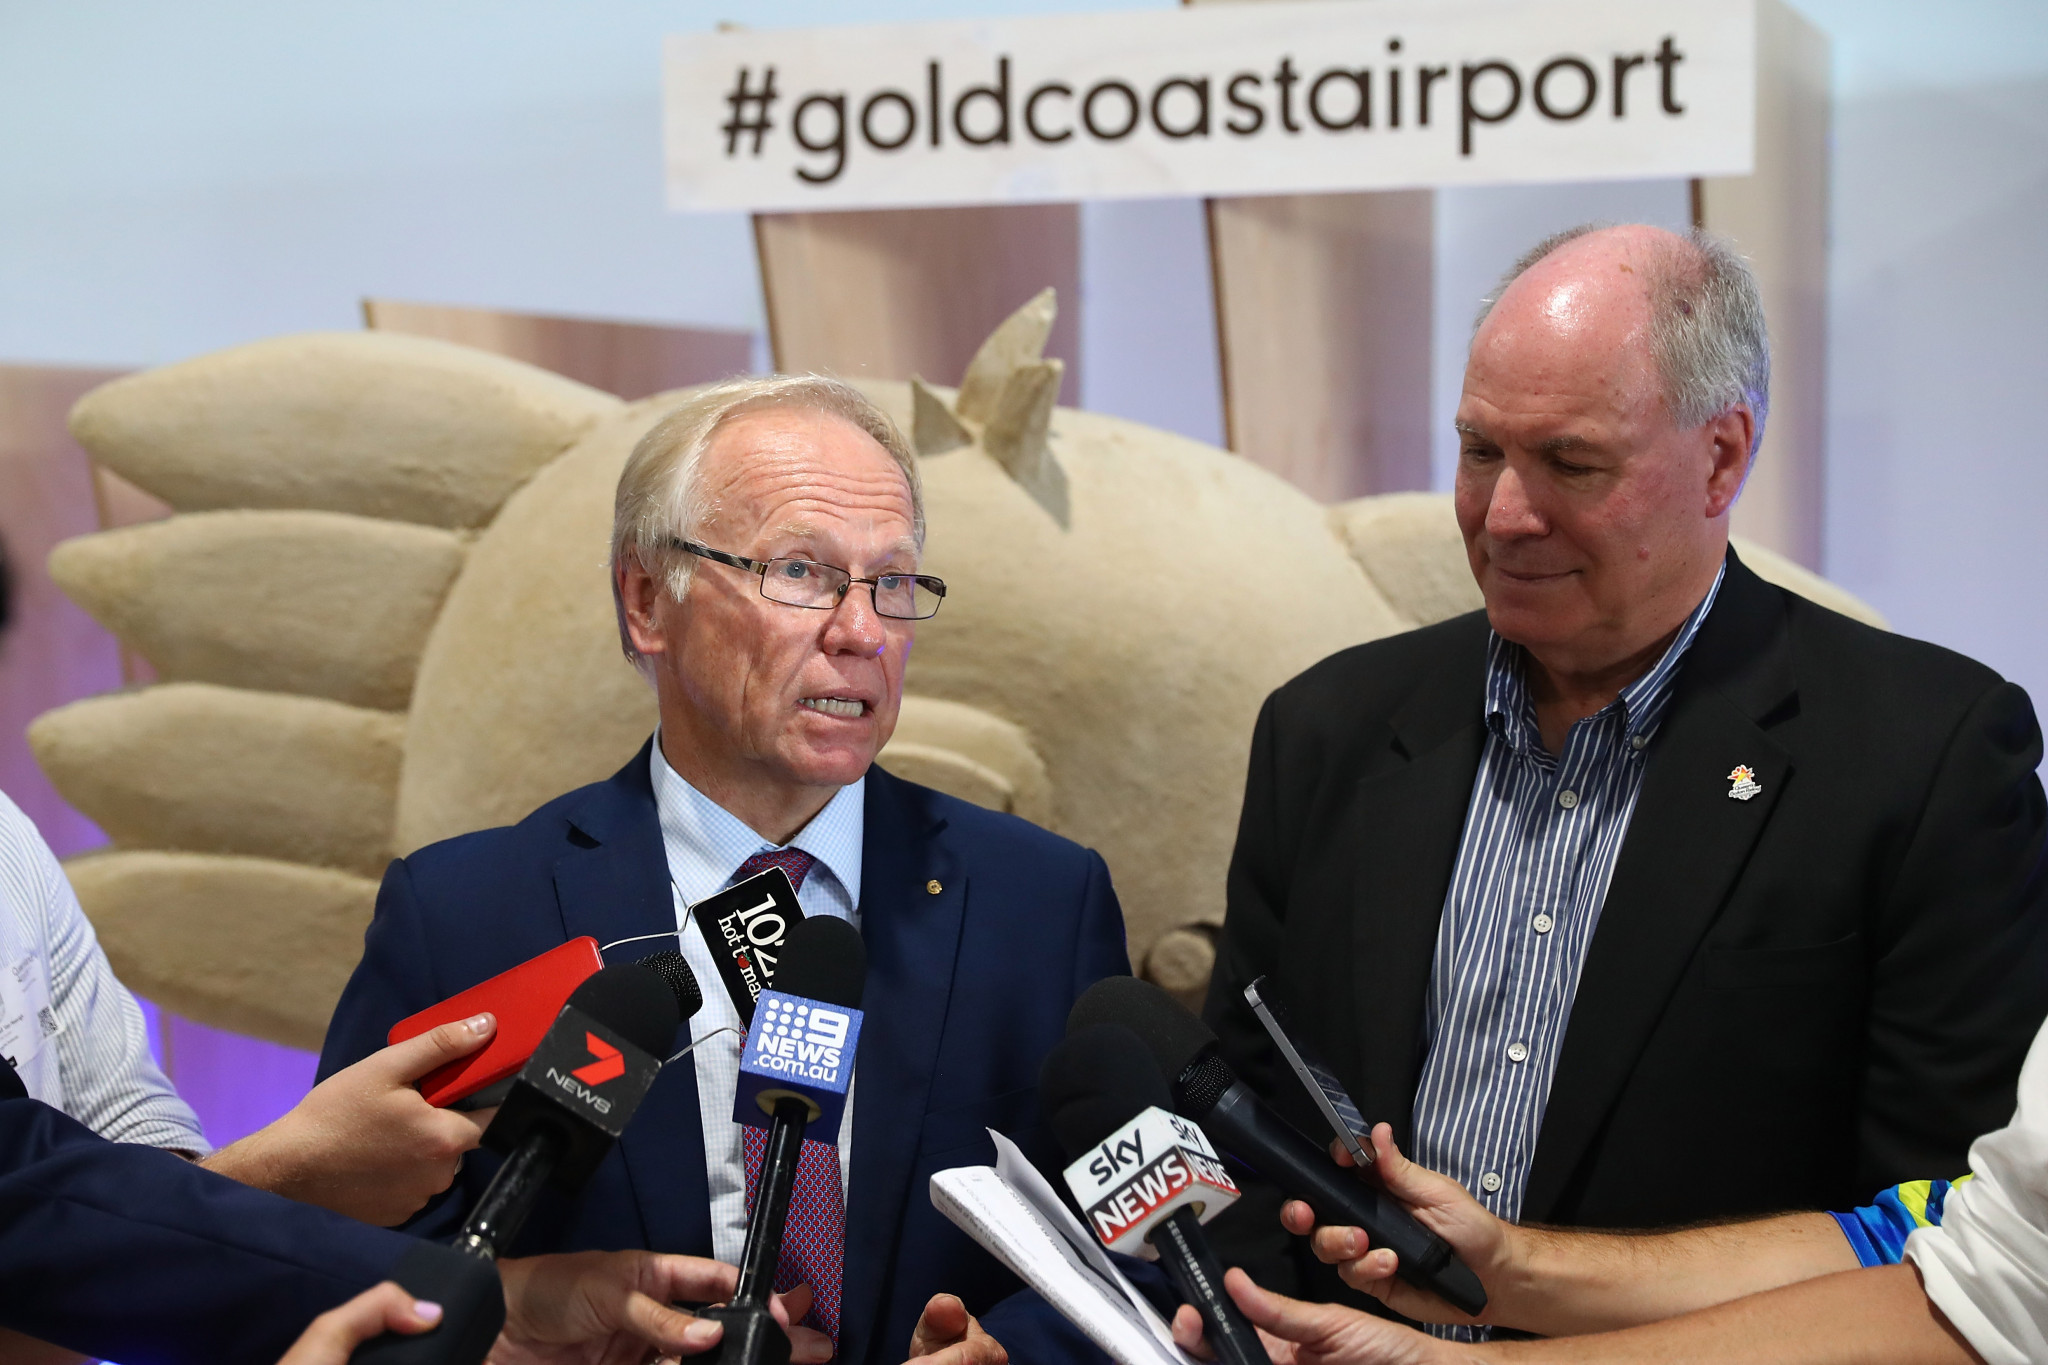 Gold Coast 2018 chairman urges locals to "get off the M1" and use public transport during Commonwealth Games